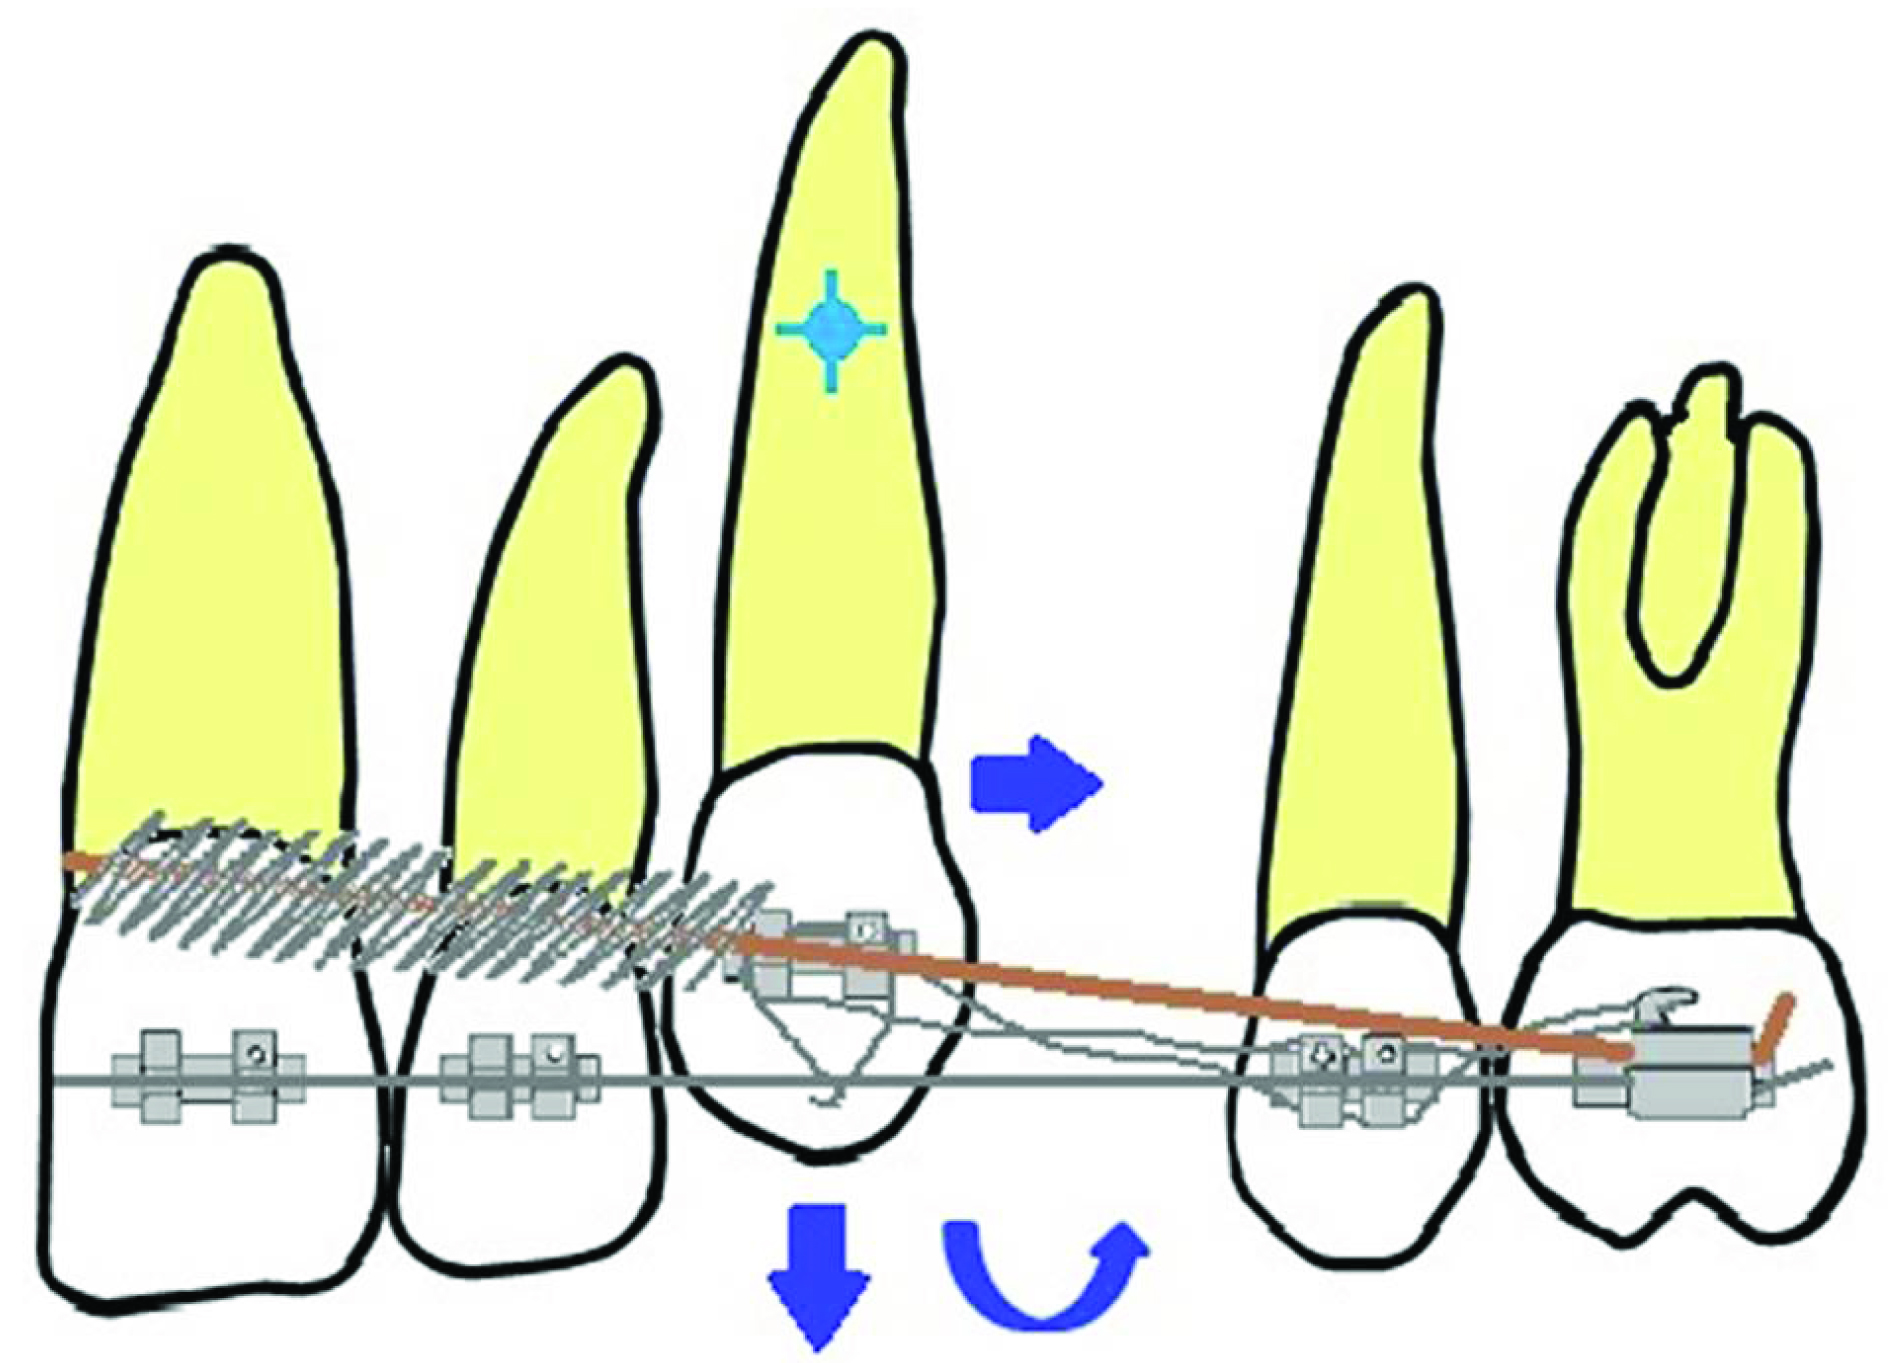 JCDR - Alignment, Canine lacebacks, Incisor crowding, Open coil